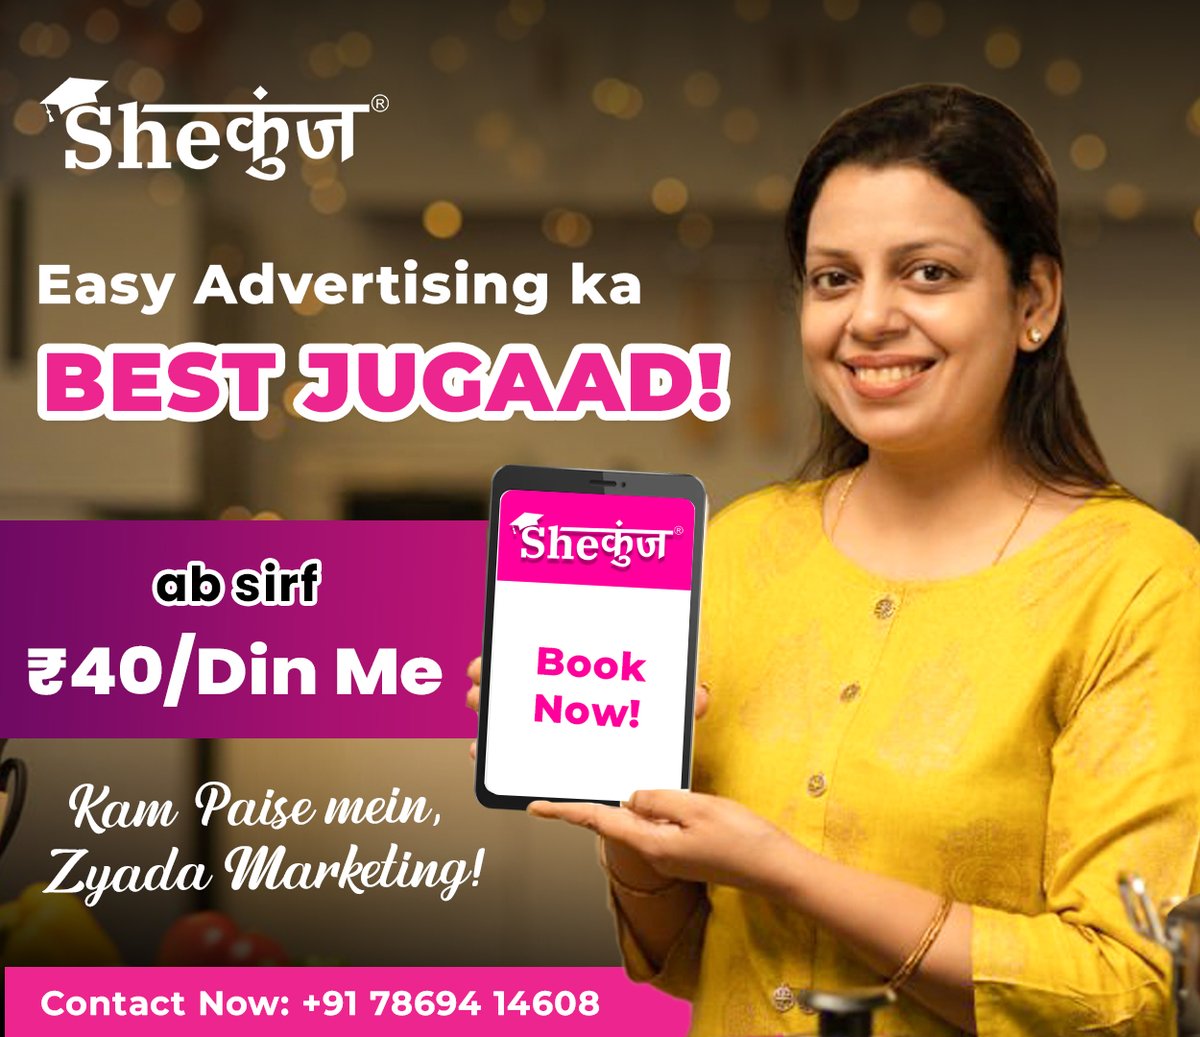 Attention Business Owners!!
Reach Thousands of Women with SheKunj.com Advertising - Starting at Just Rs. 40/day!

Contact us now at info@shekunj.com or call 7869414608.

#Shekunj #community #womencommunity #displayads #advertisement #ads #business #displayadvertising